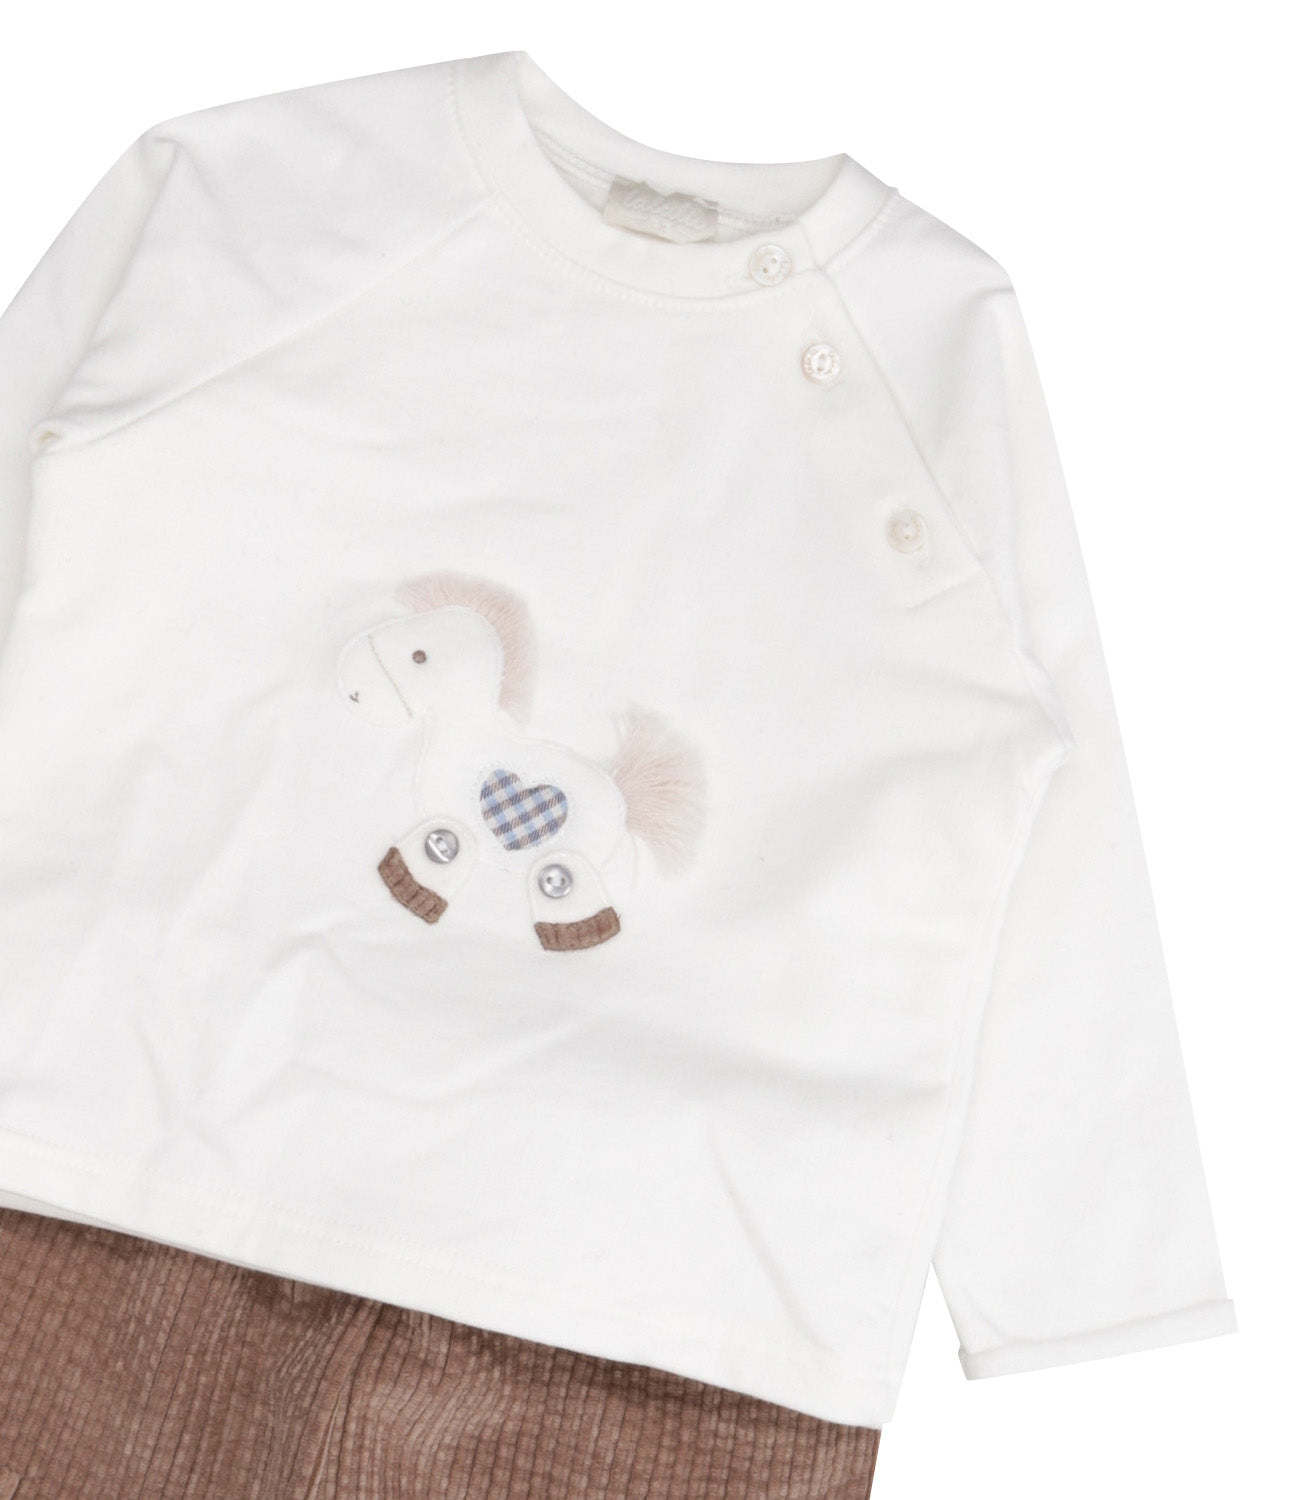 Lalalù | Brown and White Sweater and Pant Set